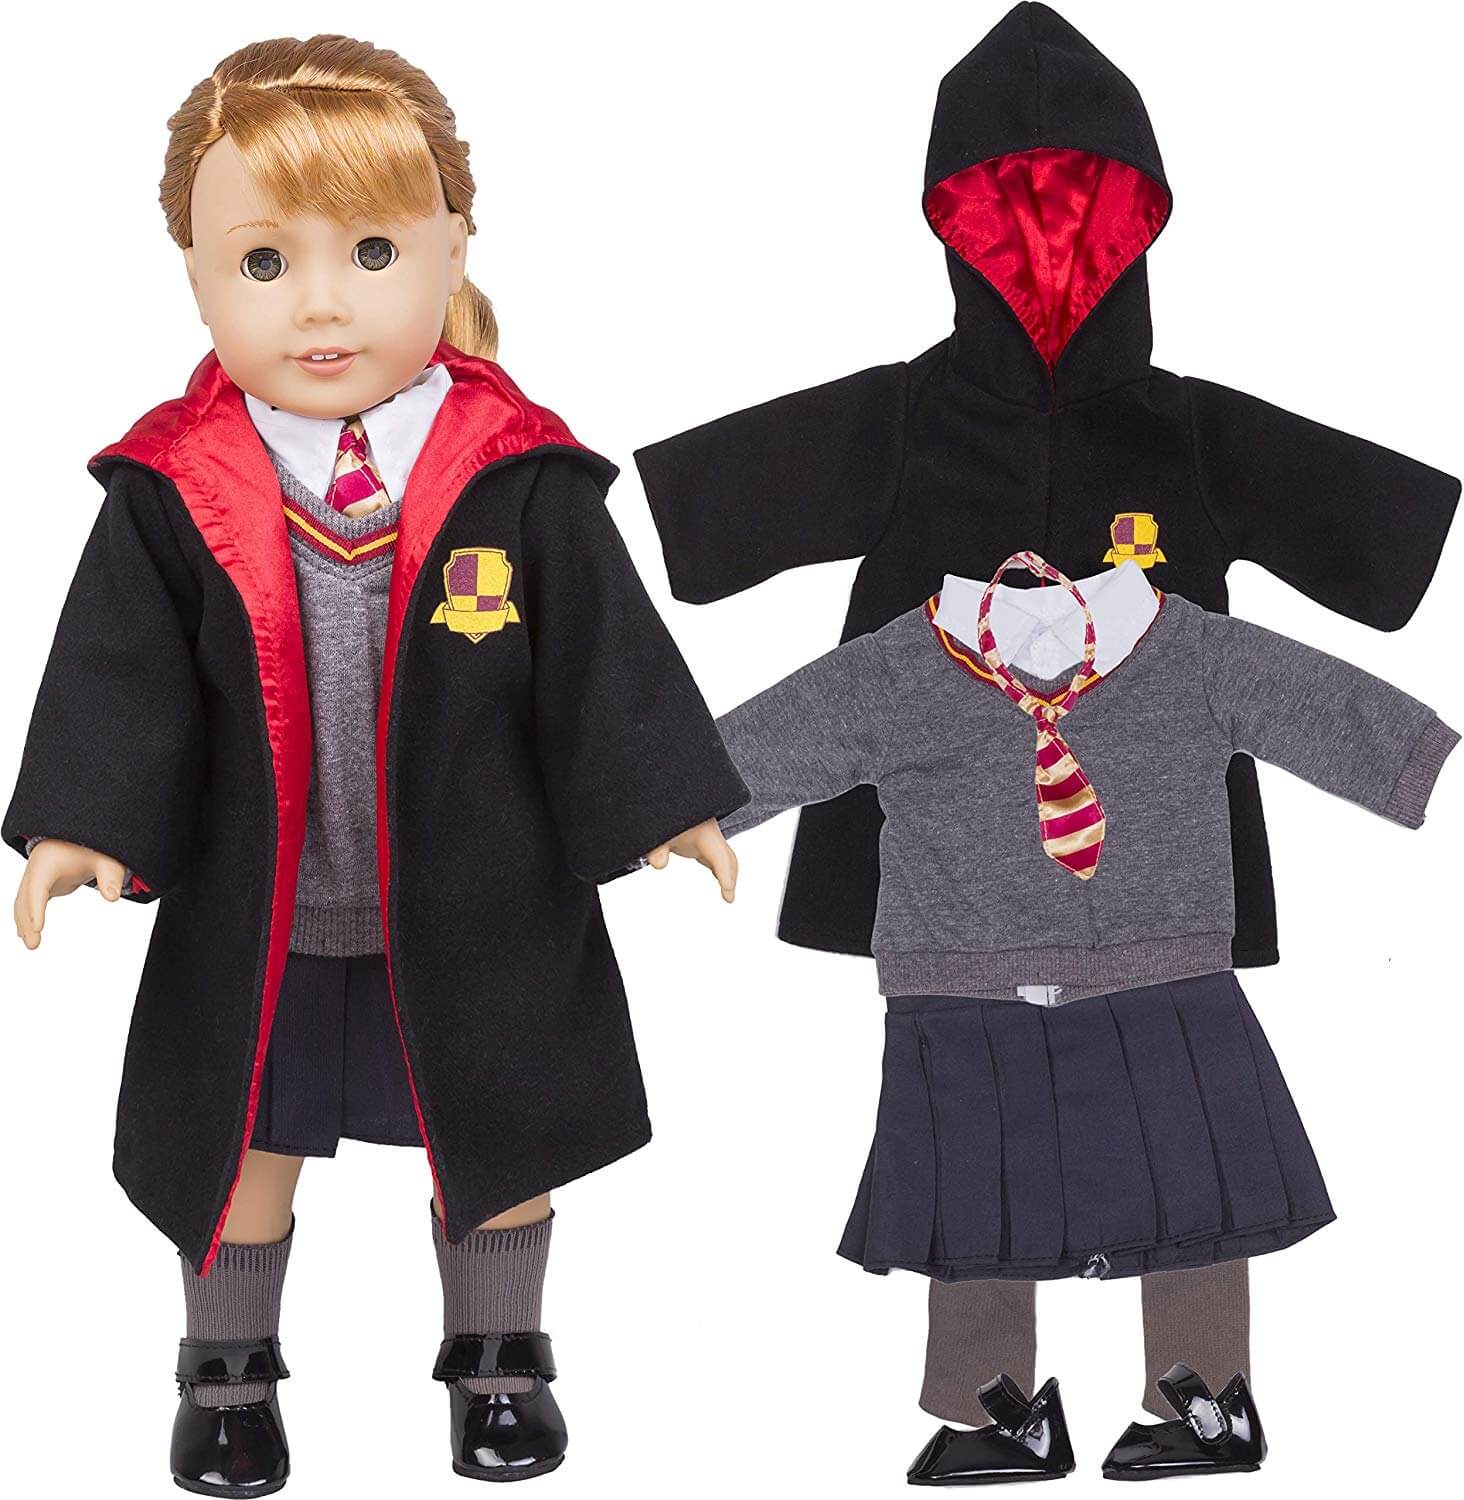 NEW HUGE CUSTOM COLLECTION FOR FANS OF HARRY POTTER AND AMERICAN GIRL DOLLS WOW! 